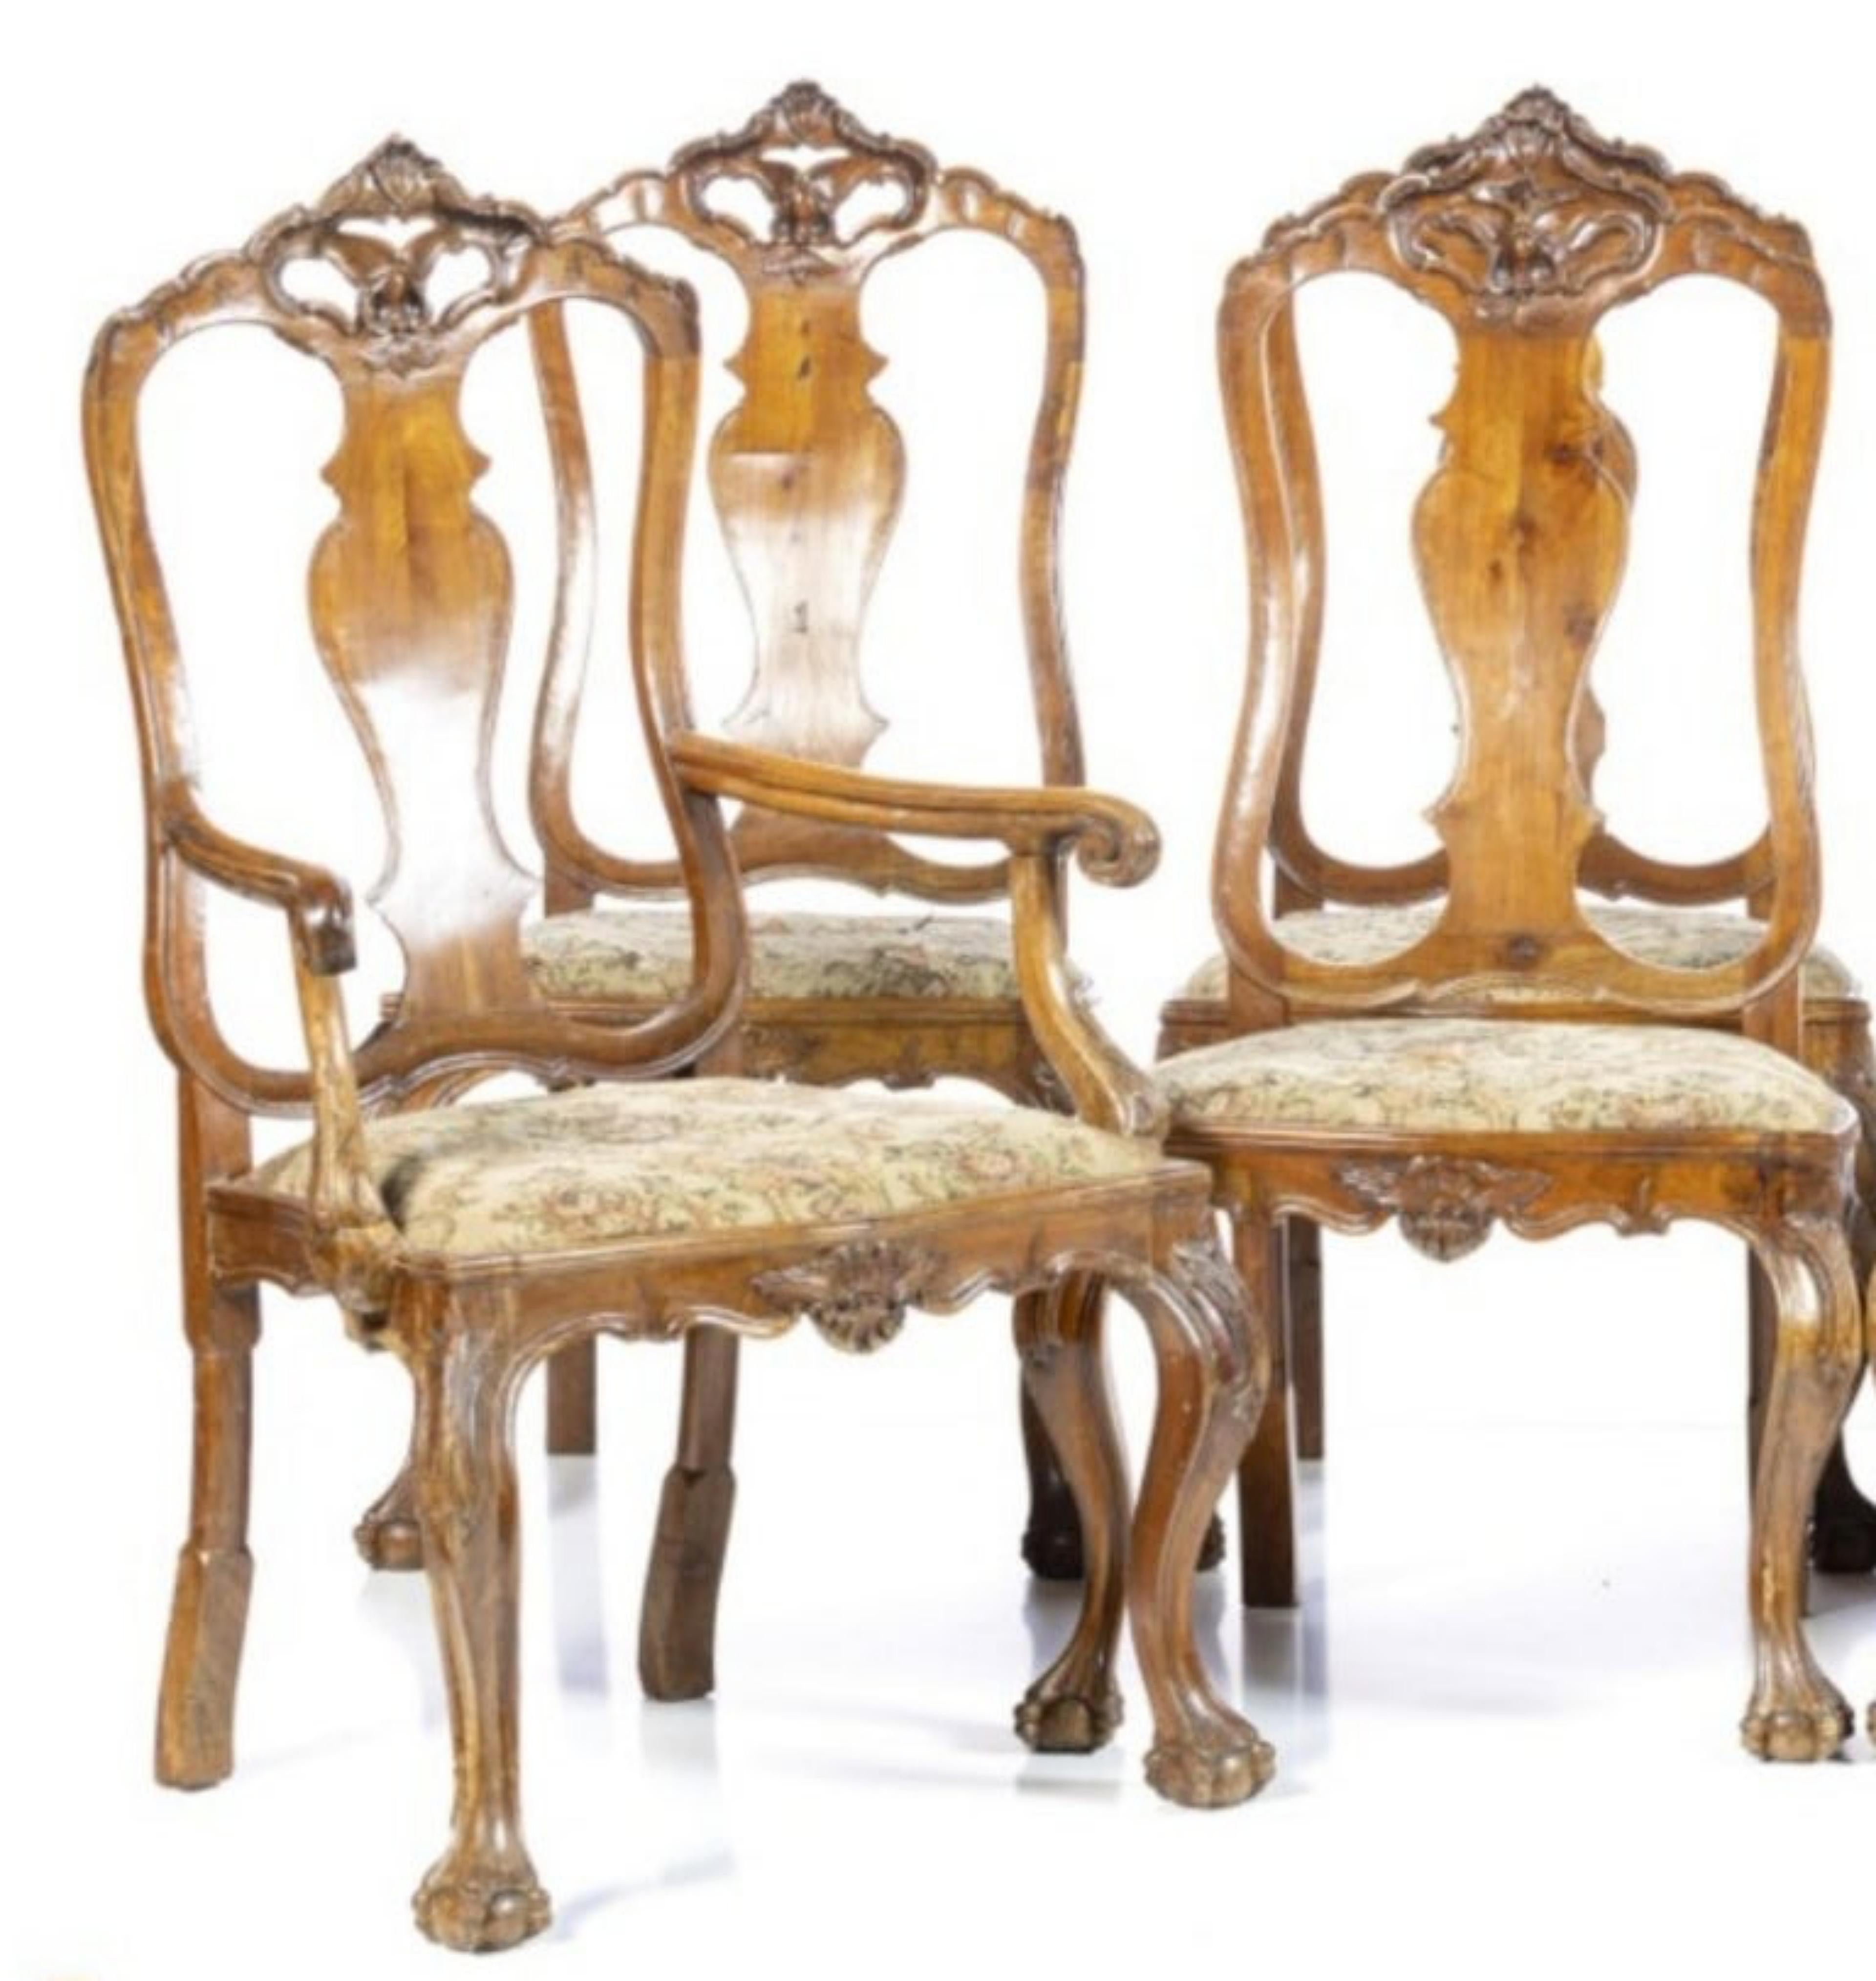 Baroque Set of Six Portuguese Chairs and Two Chairs D. João v of the 18th Century For Sale